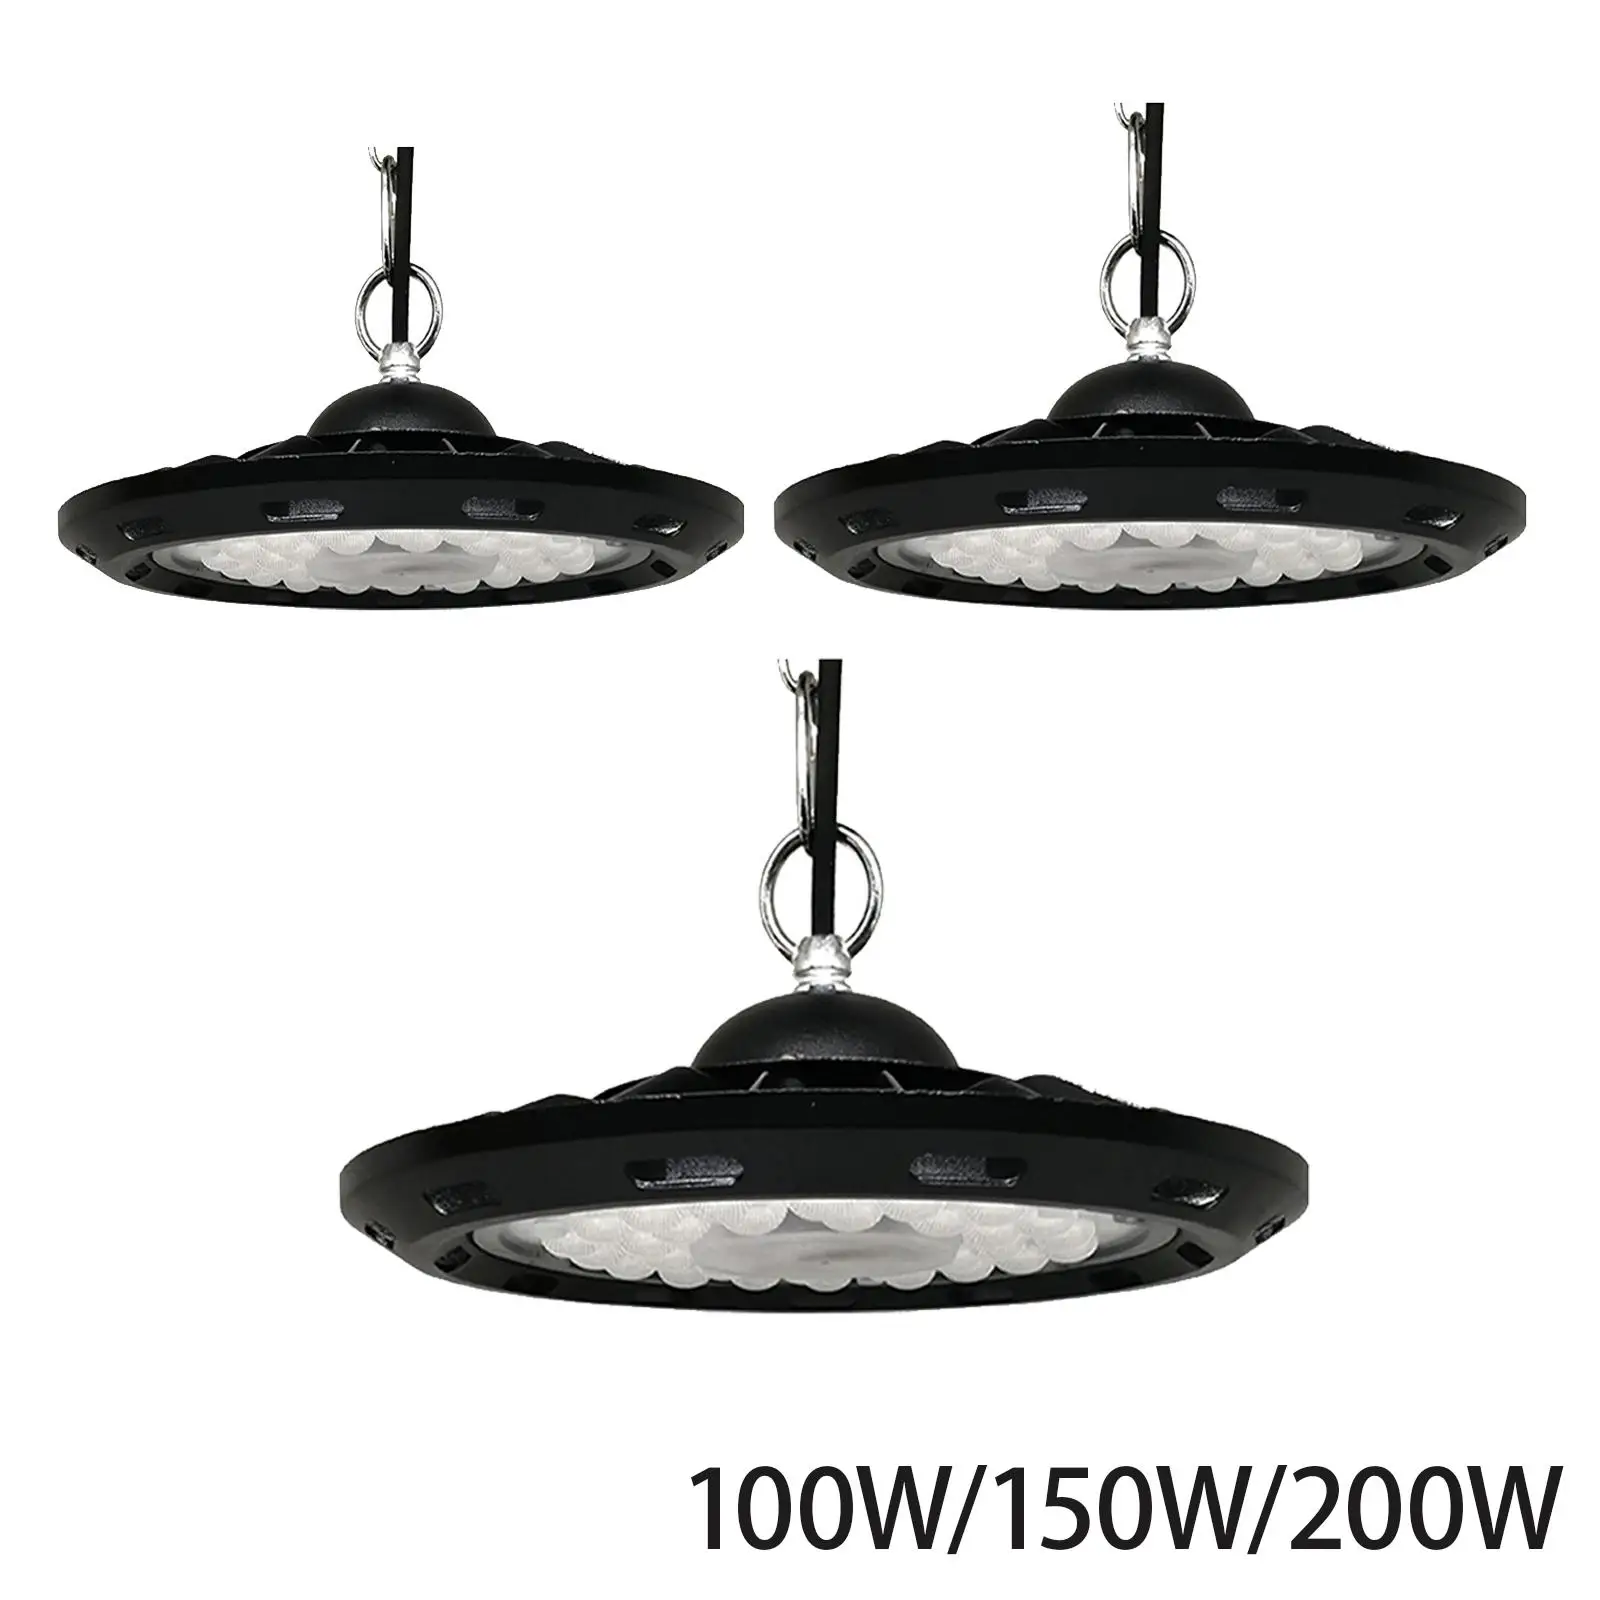 UFO LED High  ,IP65 Waterproof Ceiling Light ,Commercial  Saving Fixture Lamp for Warehouse ,Outdoor Basement ,Workshop ,Attic